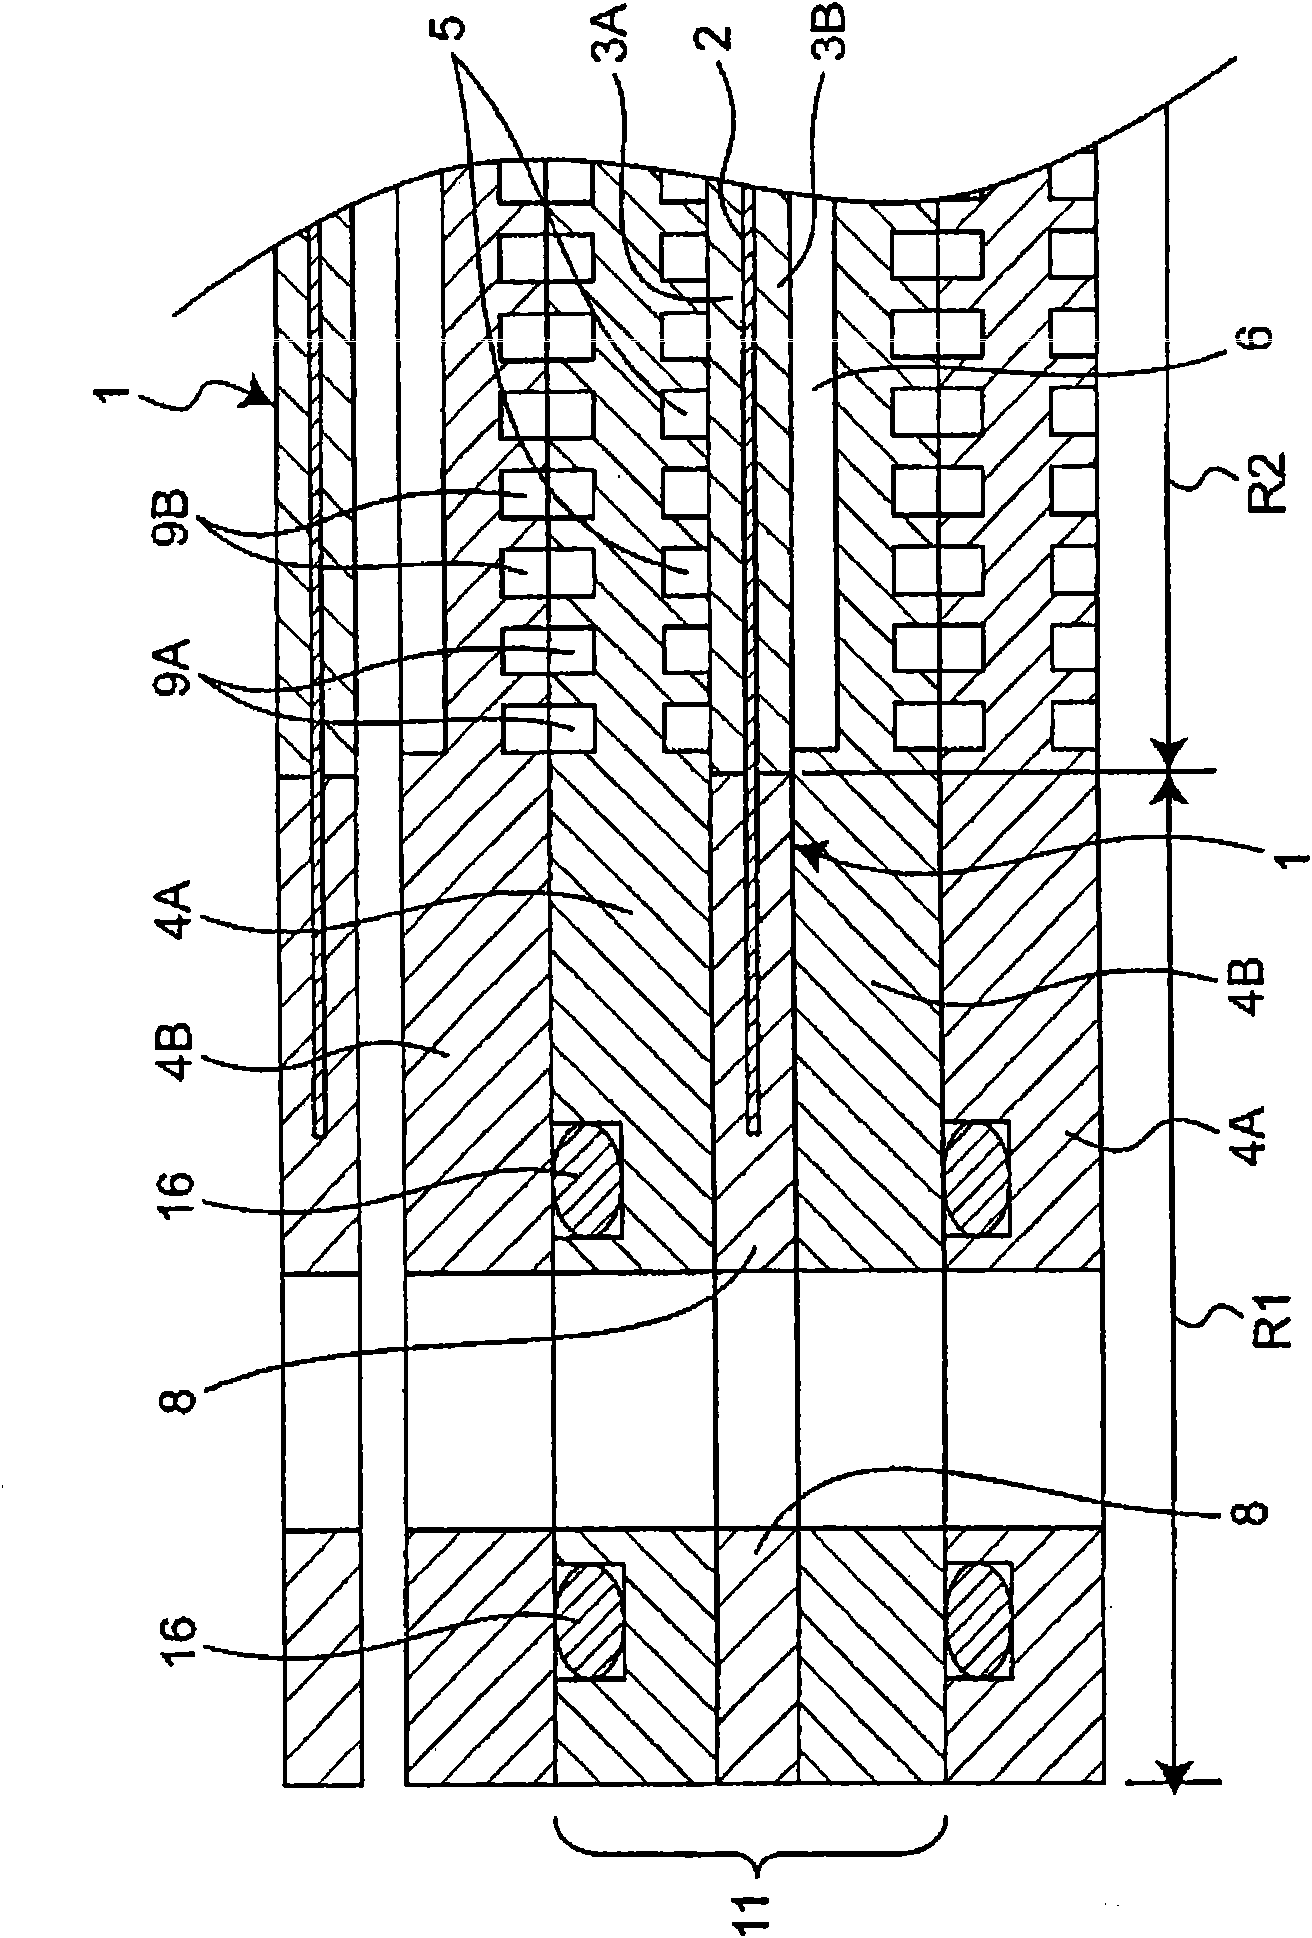 Polymer electrolyte fuel cell